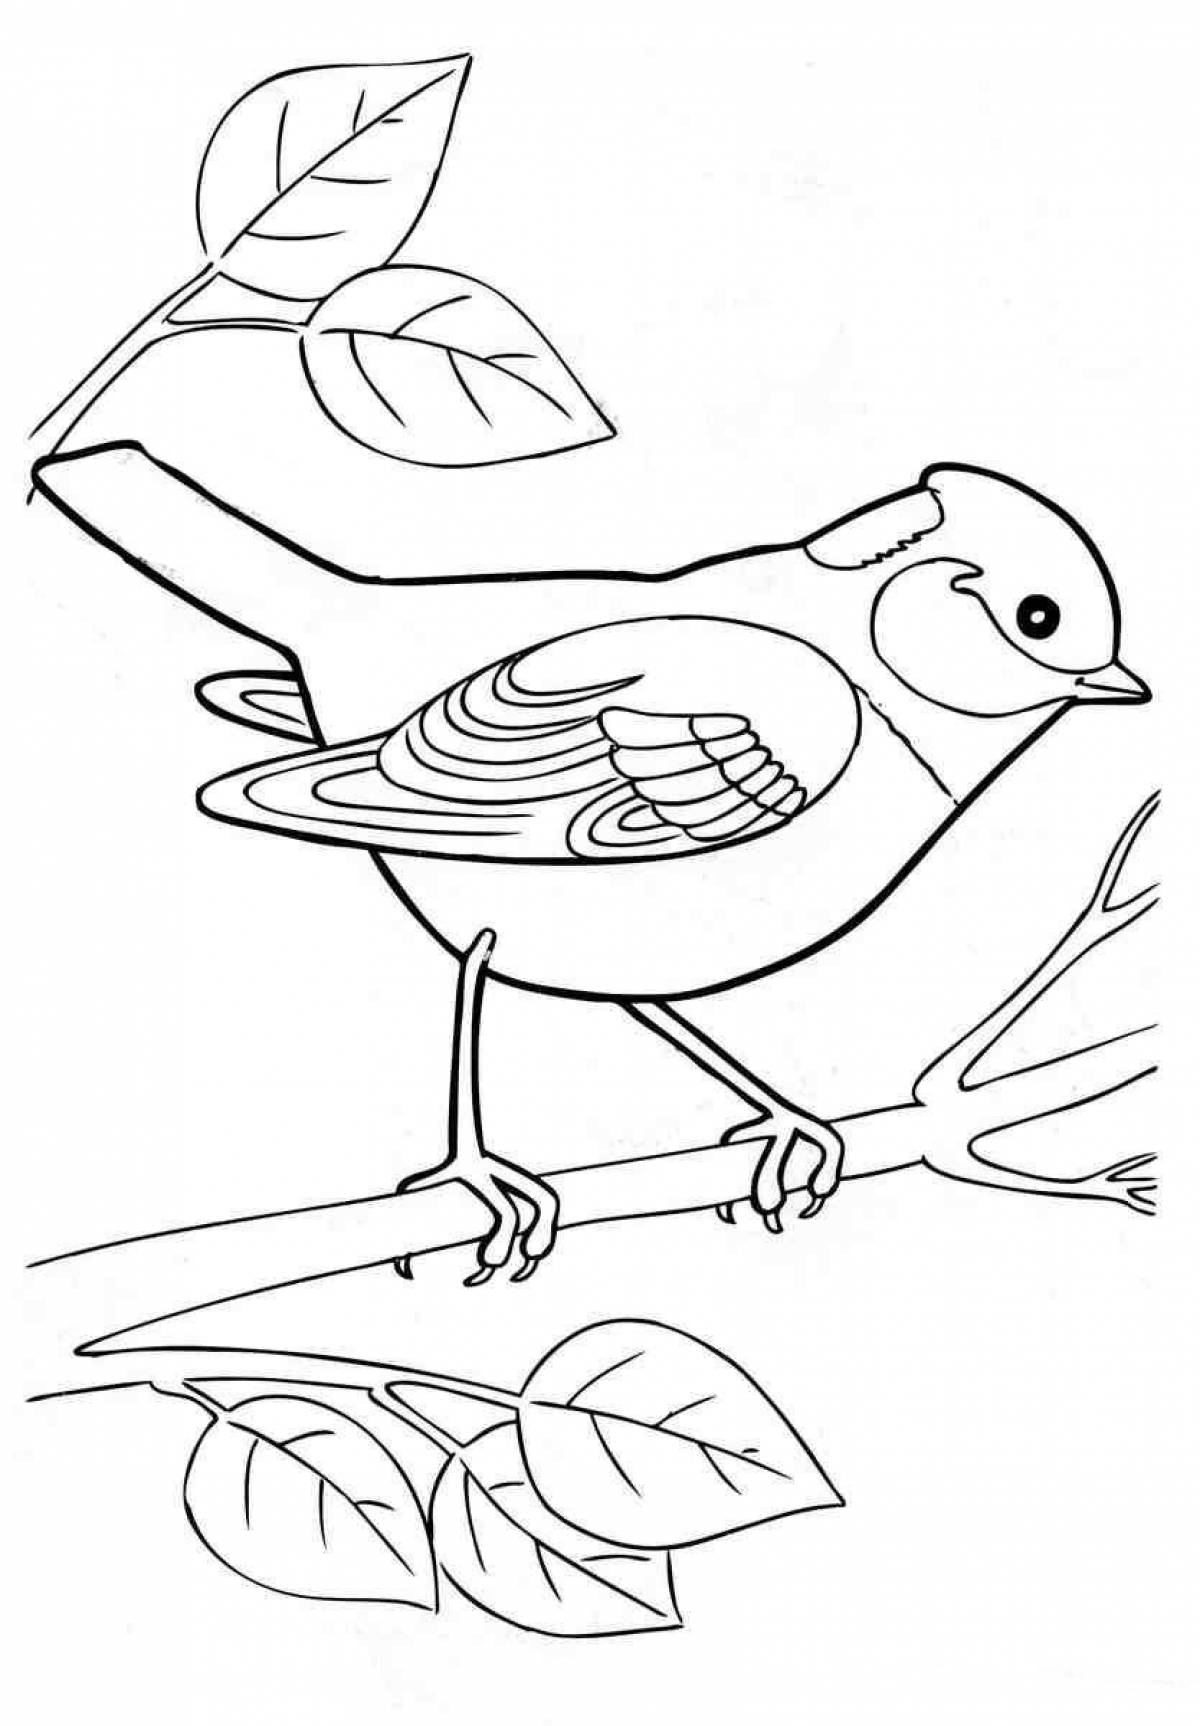 Outstanding winter bird coloring book for 4-5 year olds